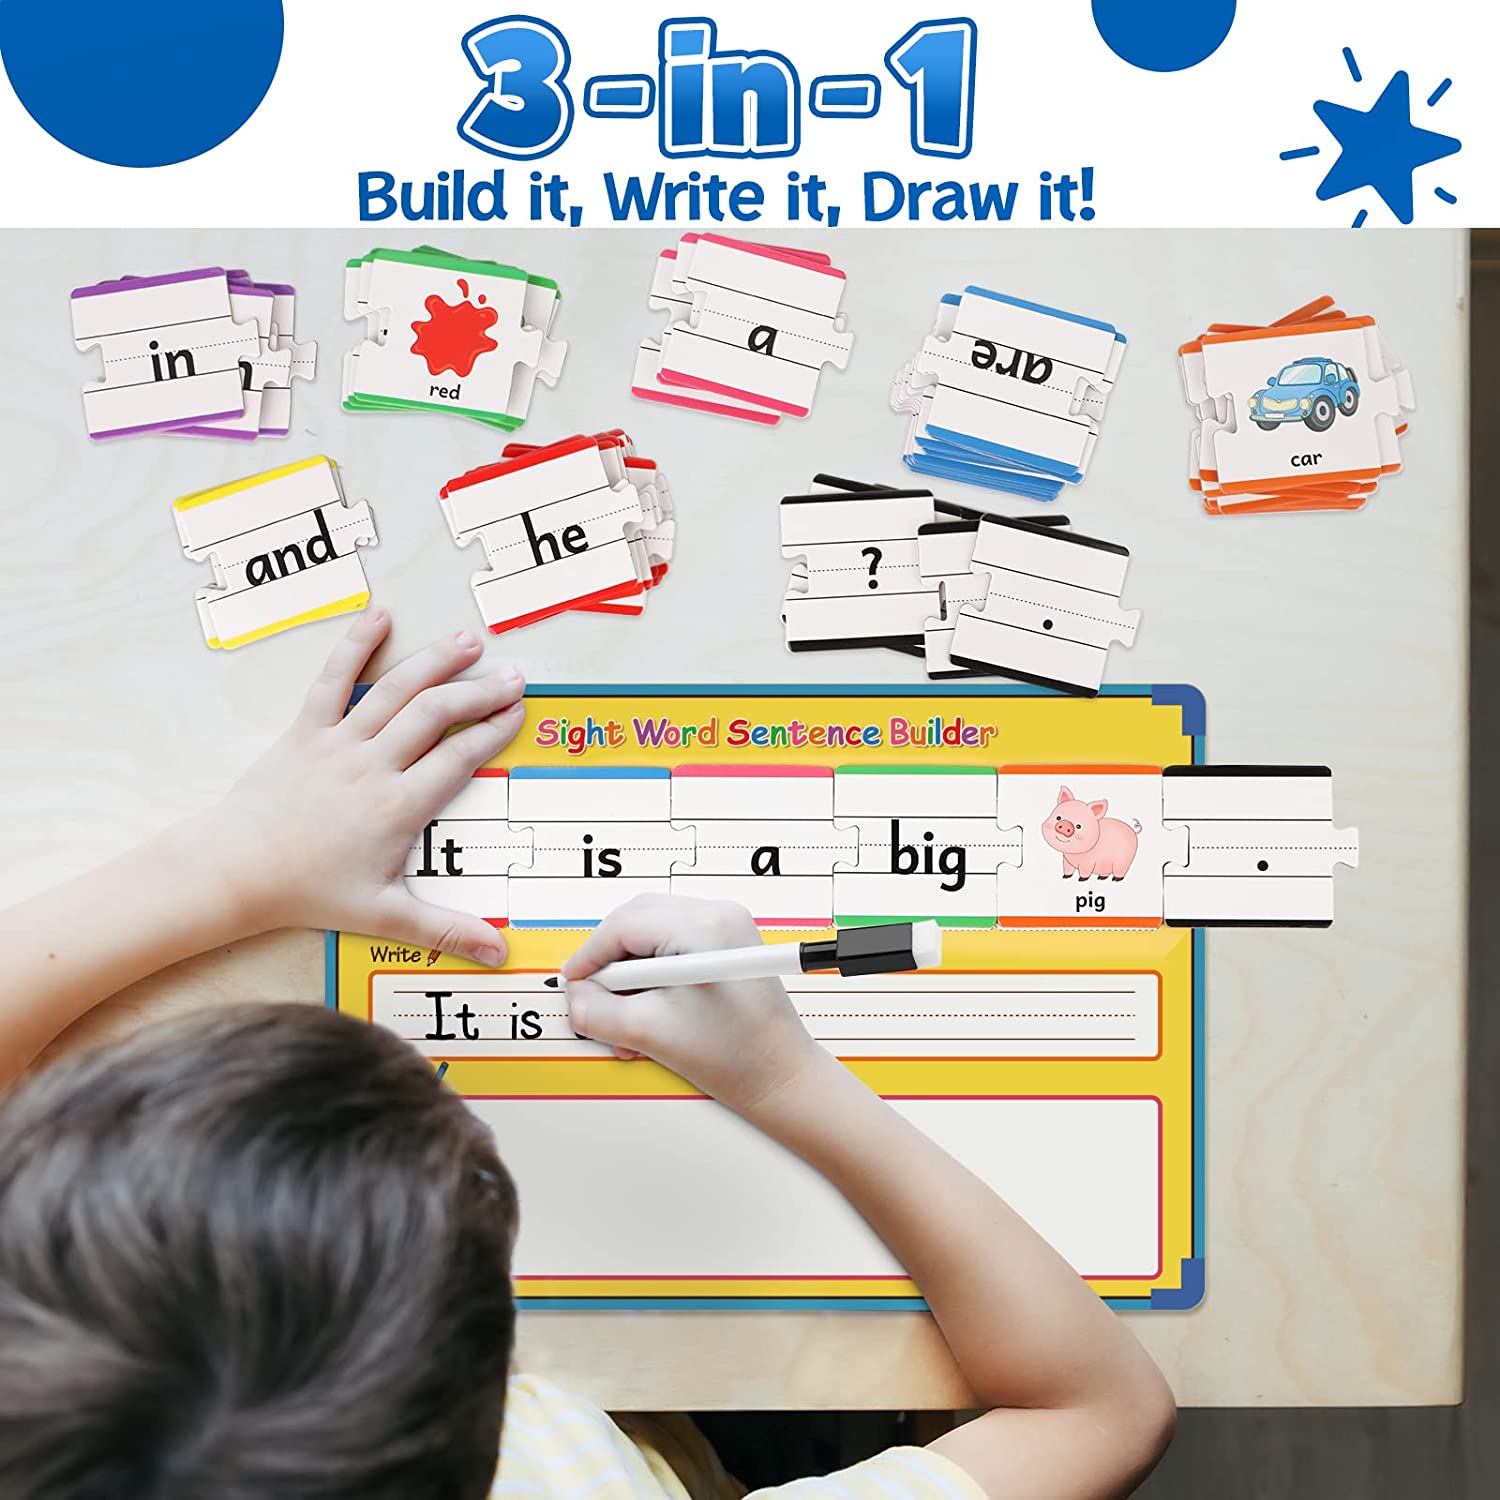 Sentence Building,Sight Word Games for Kindergarten 1st 2nd Grade Classroom Must Haves, Phonics Reading Learning Games,Speech Therapy Special Education Manipulative Toy for Teacher